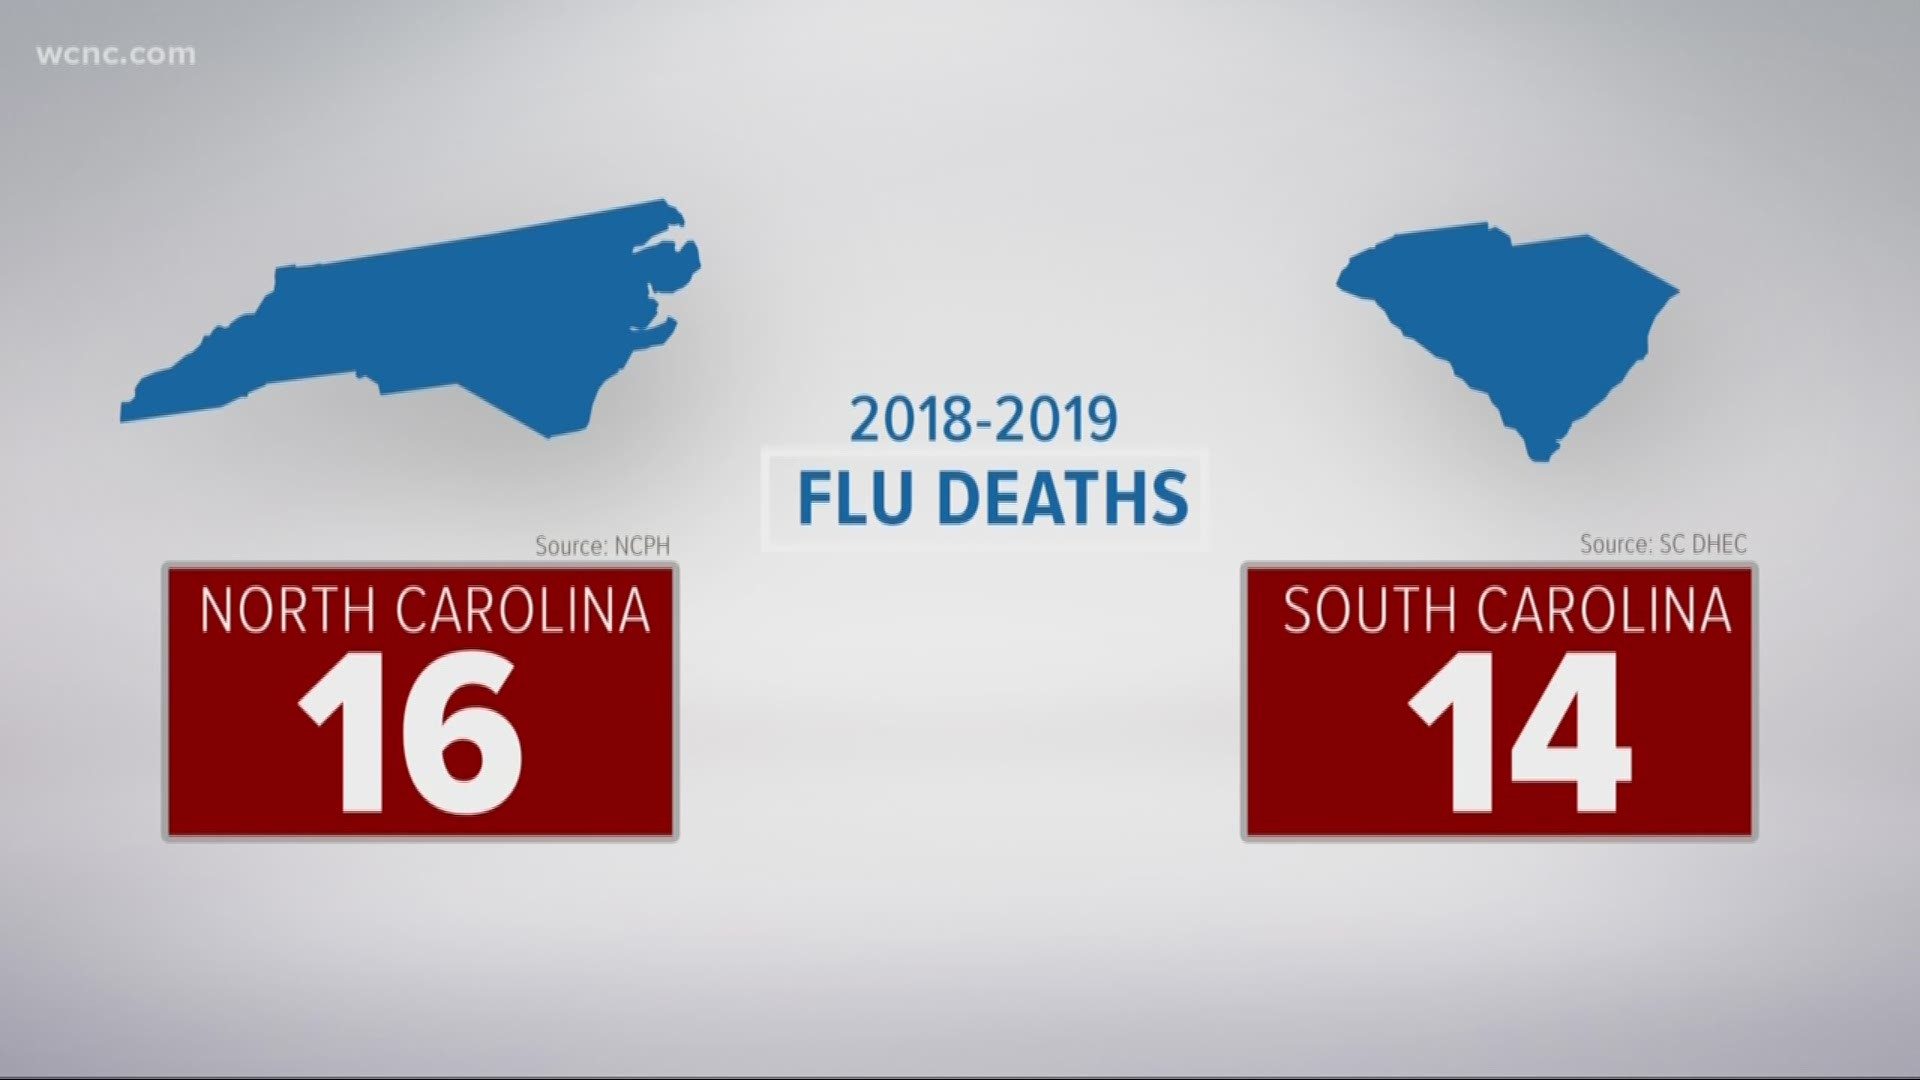 Charlotte-Mecklenburg Schools say they've seen an uptick in flu cases and one Fort Mill high school saw 50 cases in just one week.